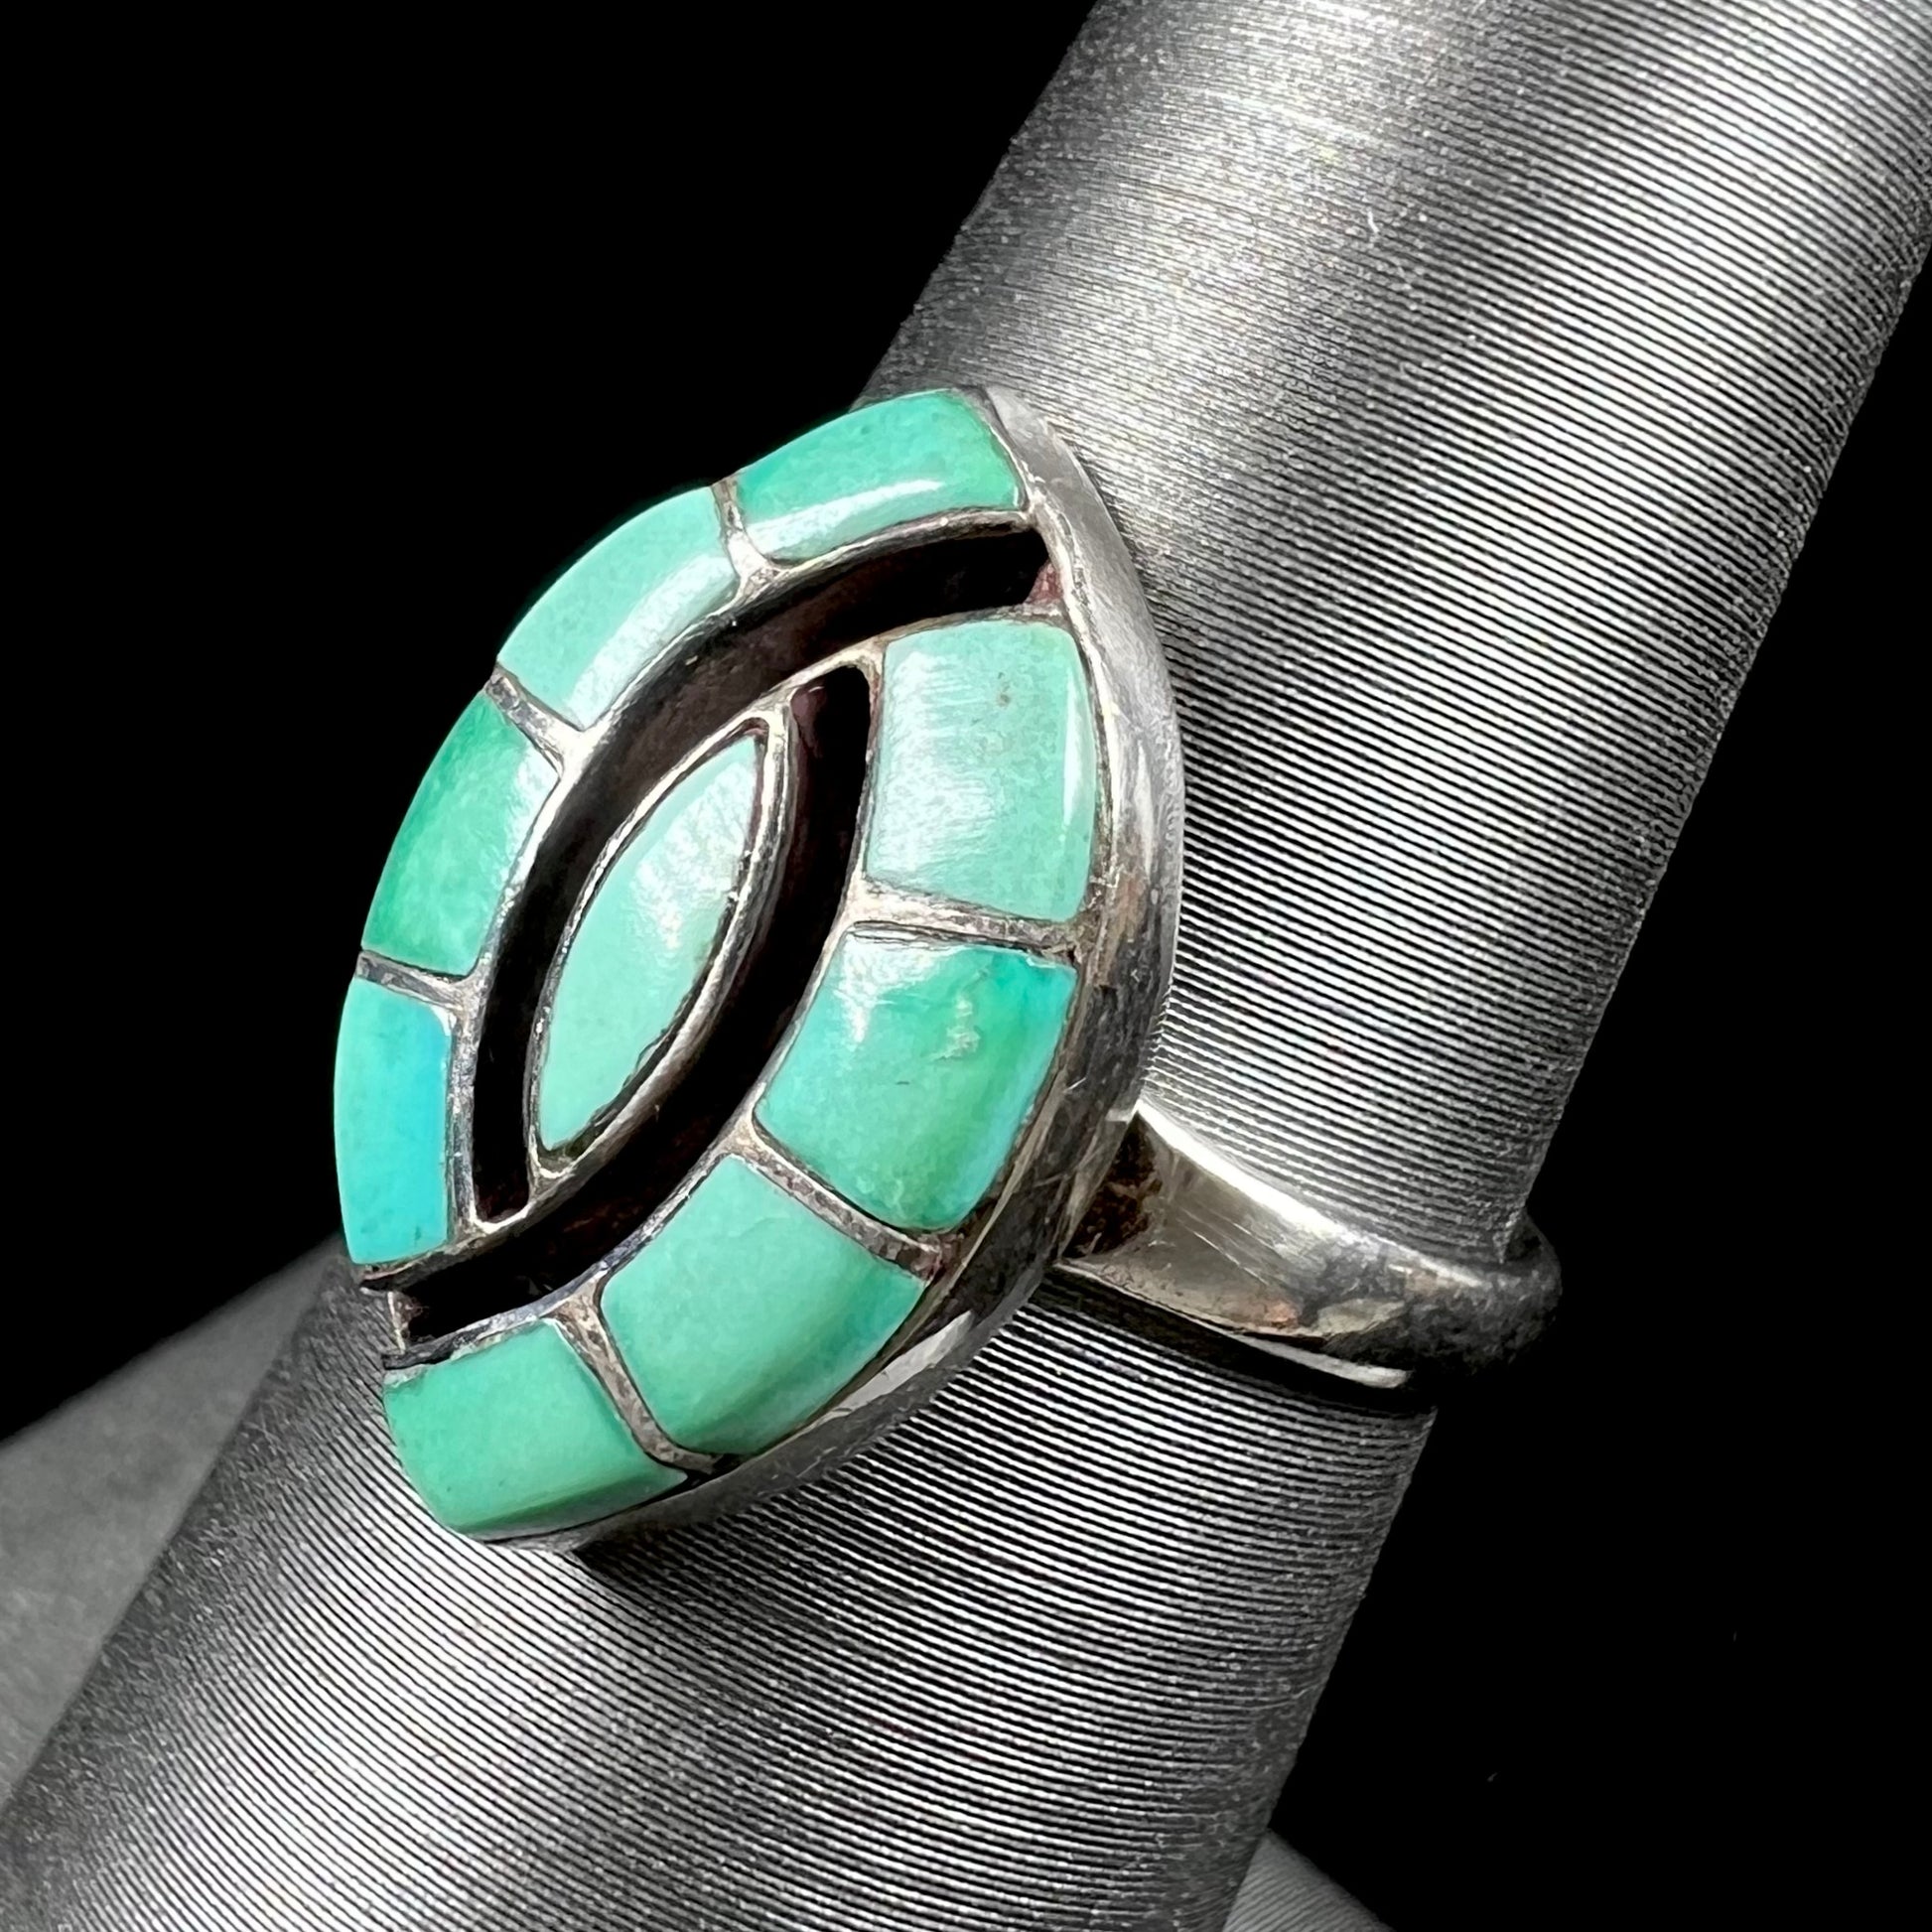 Vintage sterling silver Zuni Indian ring inlay set with green turquoise stones in the motif of a hummingbird.